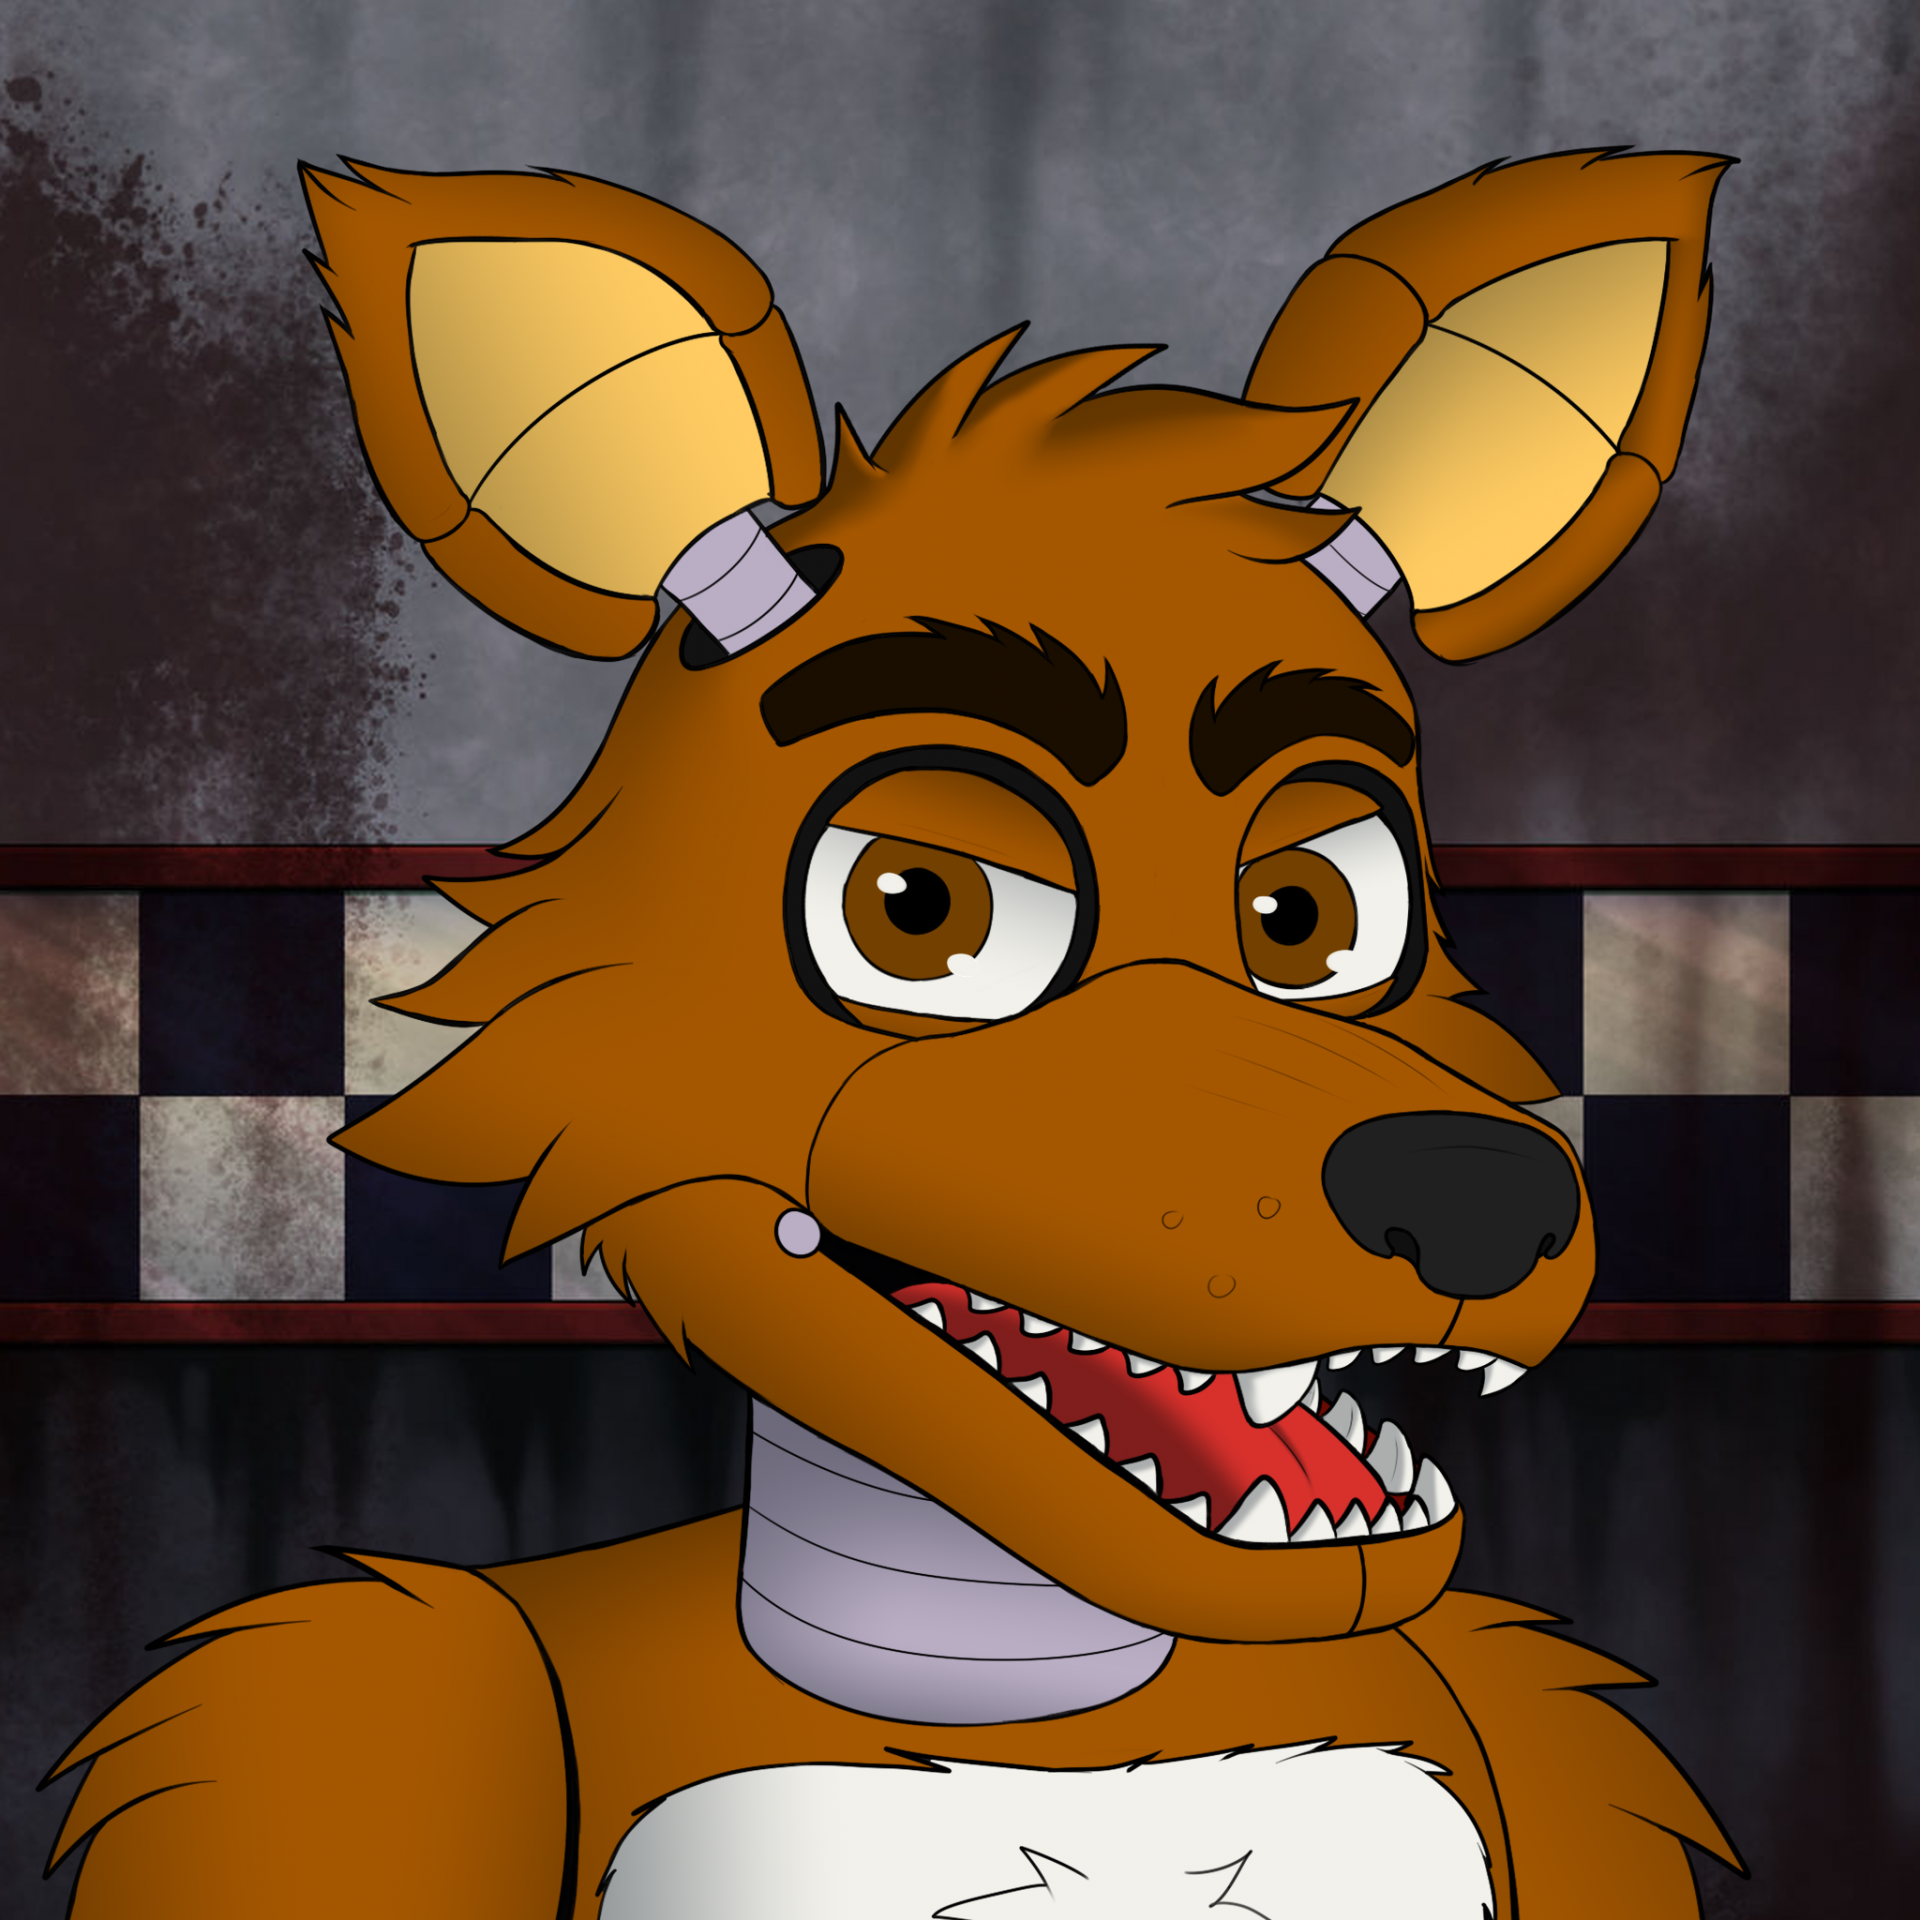 Withered Freddy feet by 3nz0 -- Fur Affinity [dot] net